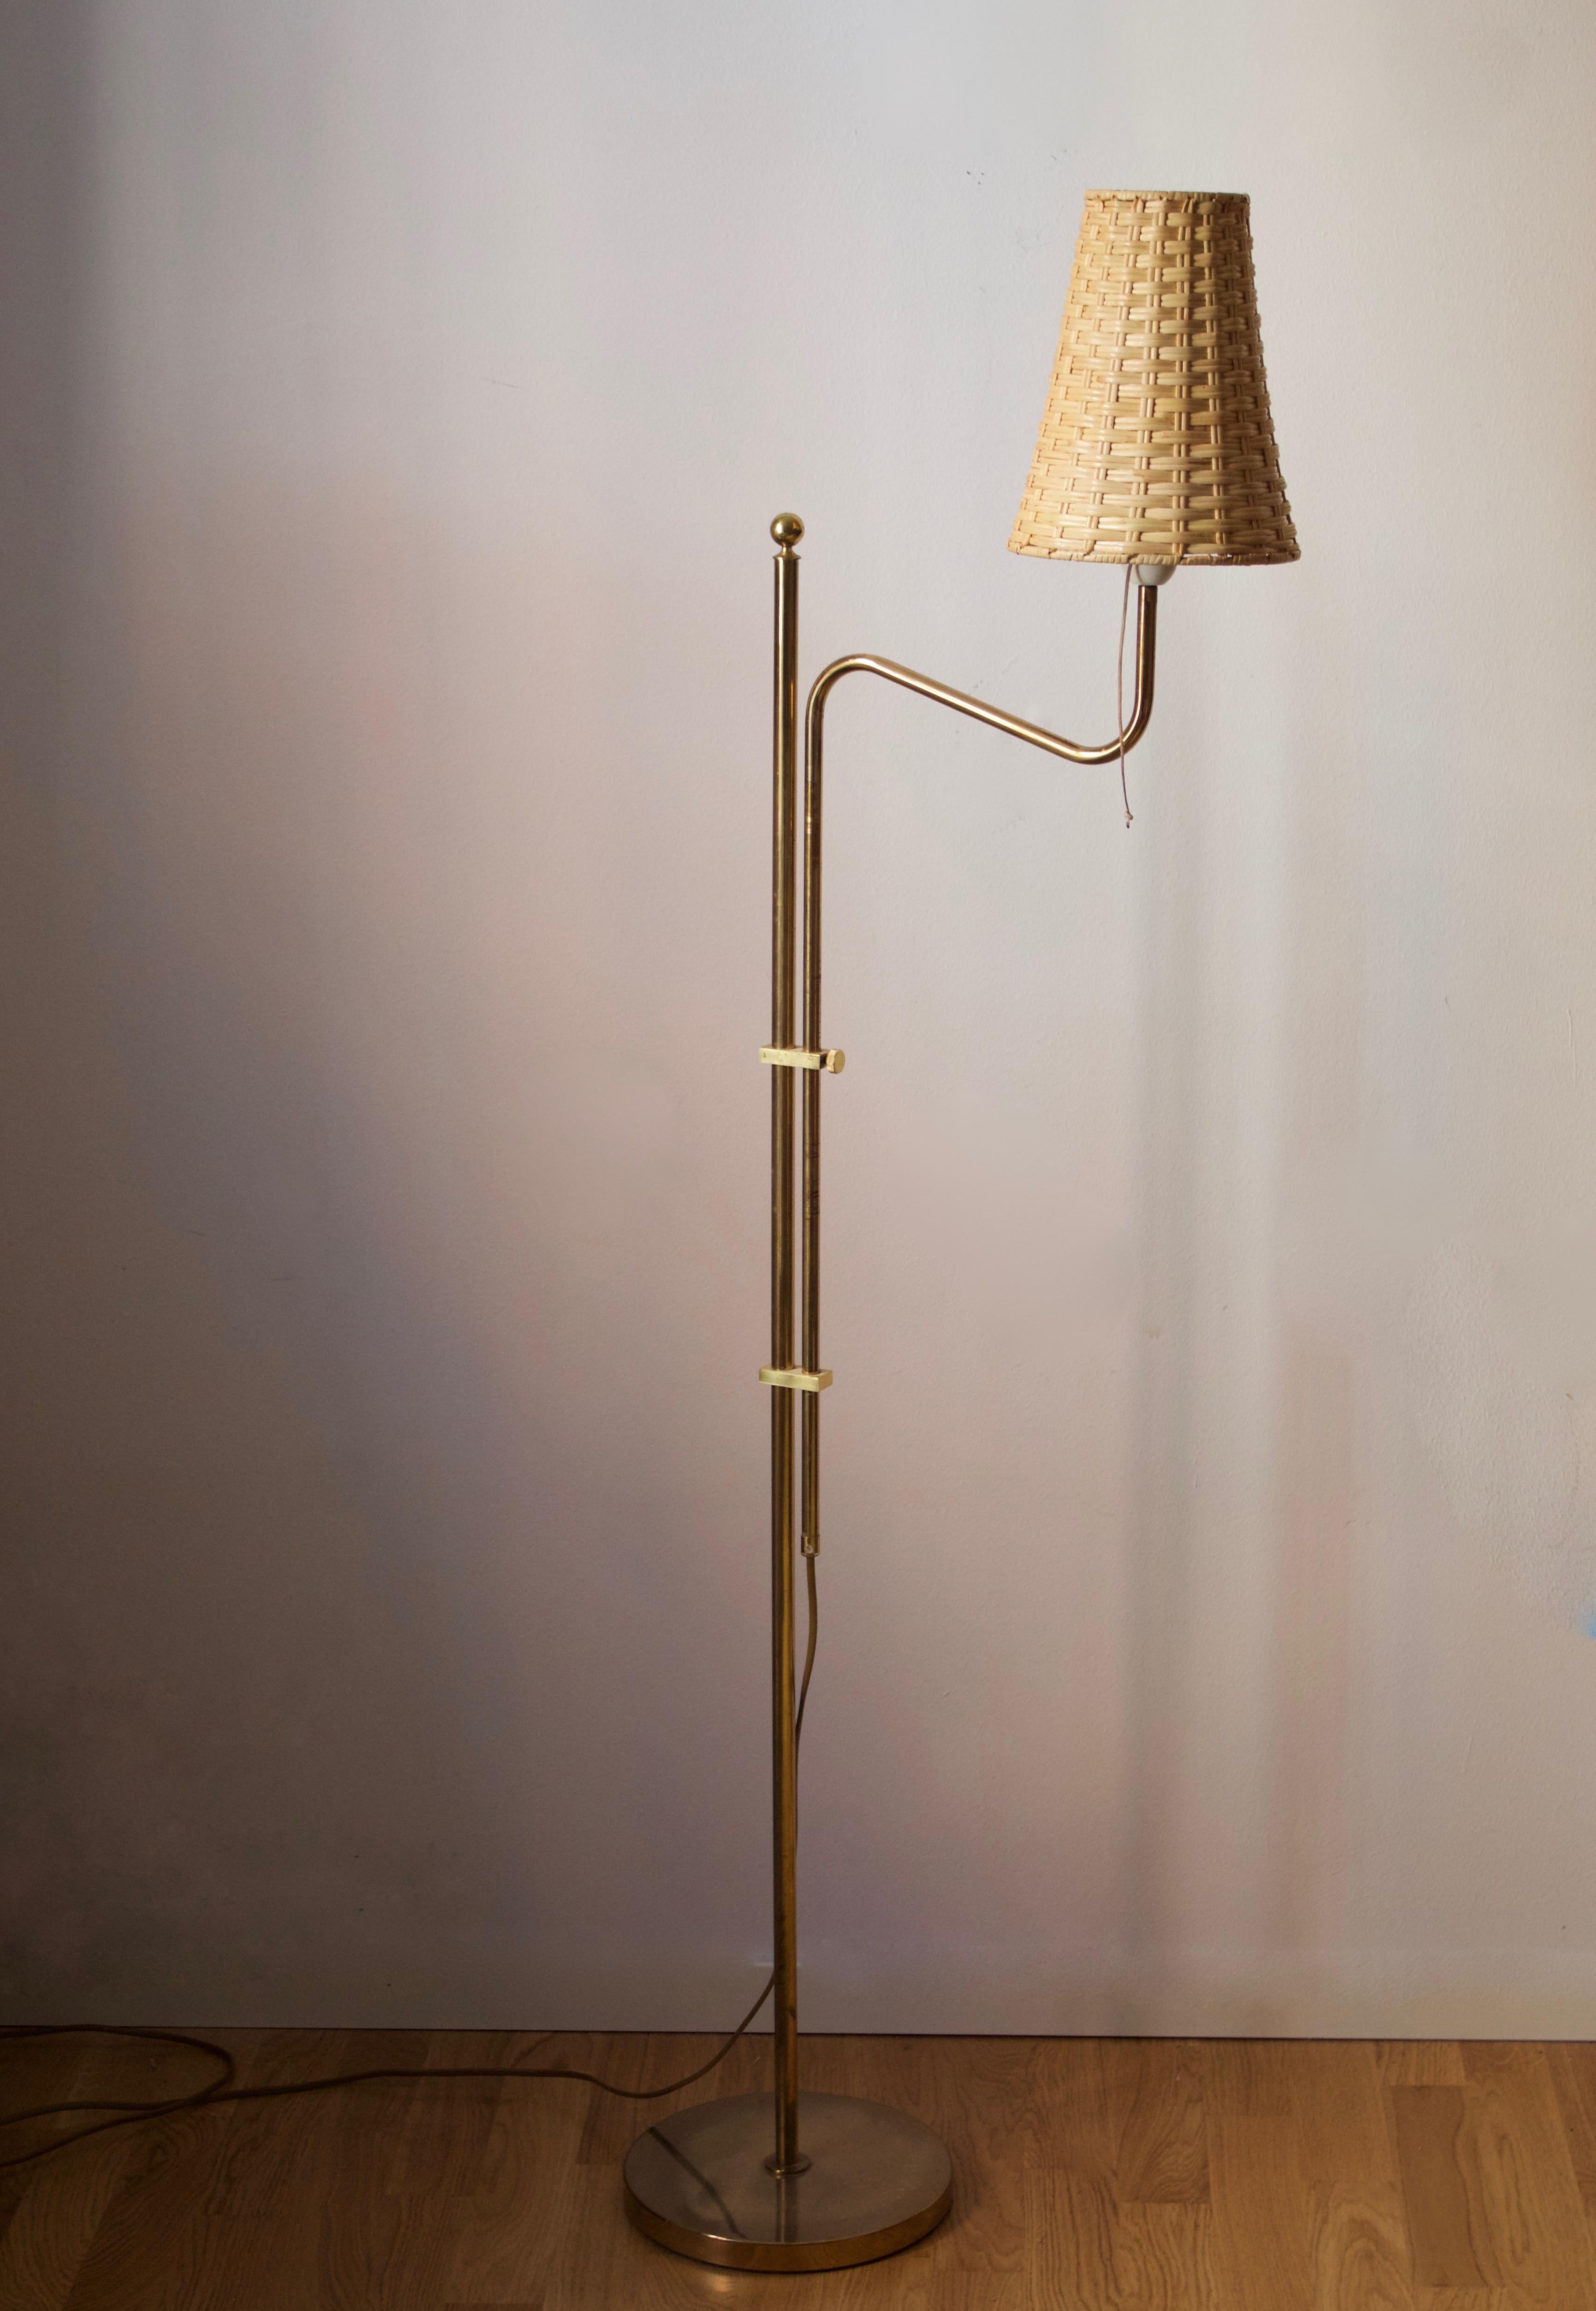 An adjustable floor lamp. Designed and produced by Bergboms, Sweden, c. 1970s. Assorted vintage rattan lampshade.

Other designers of the period include Paavo Tynell, Hans Bergström, Josef Frank, and Kaare Klint.